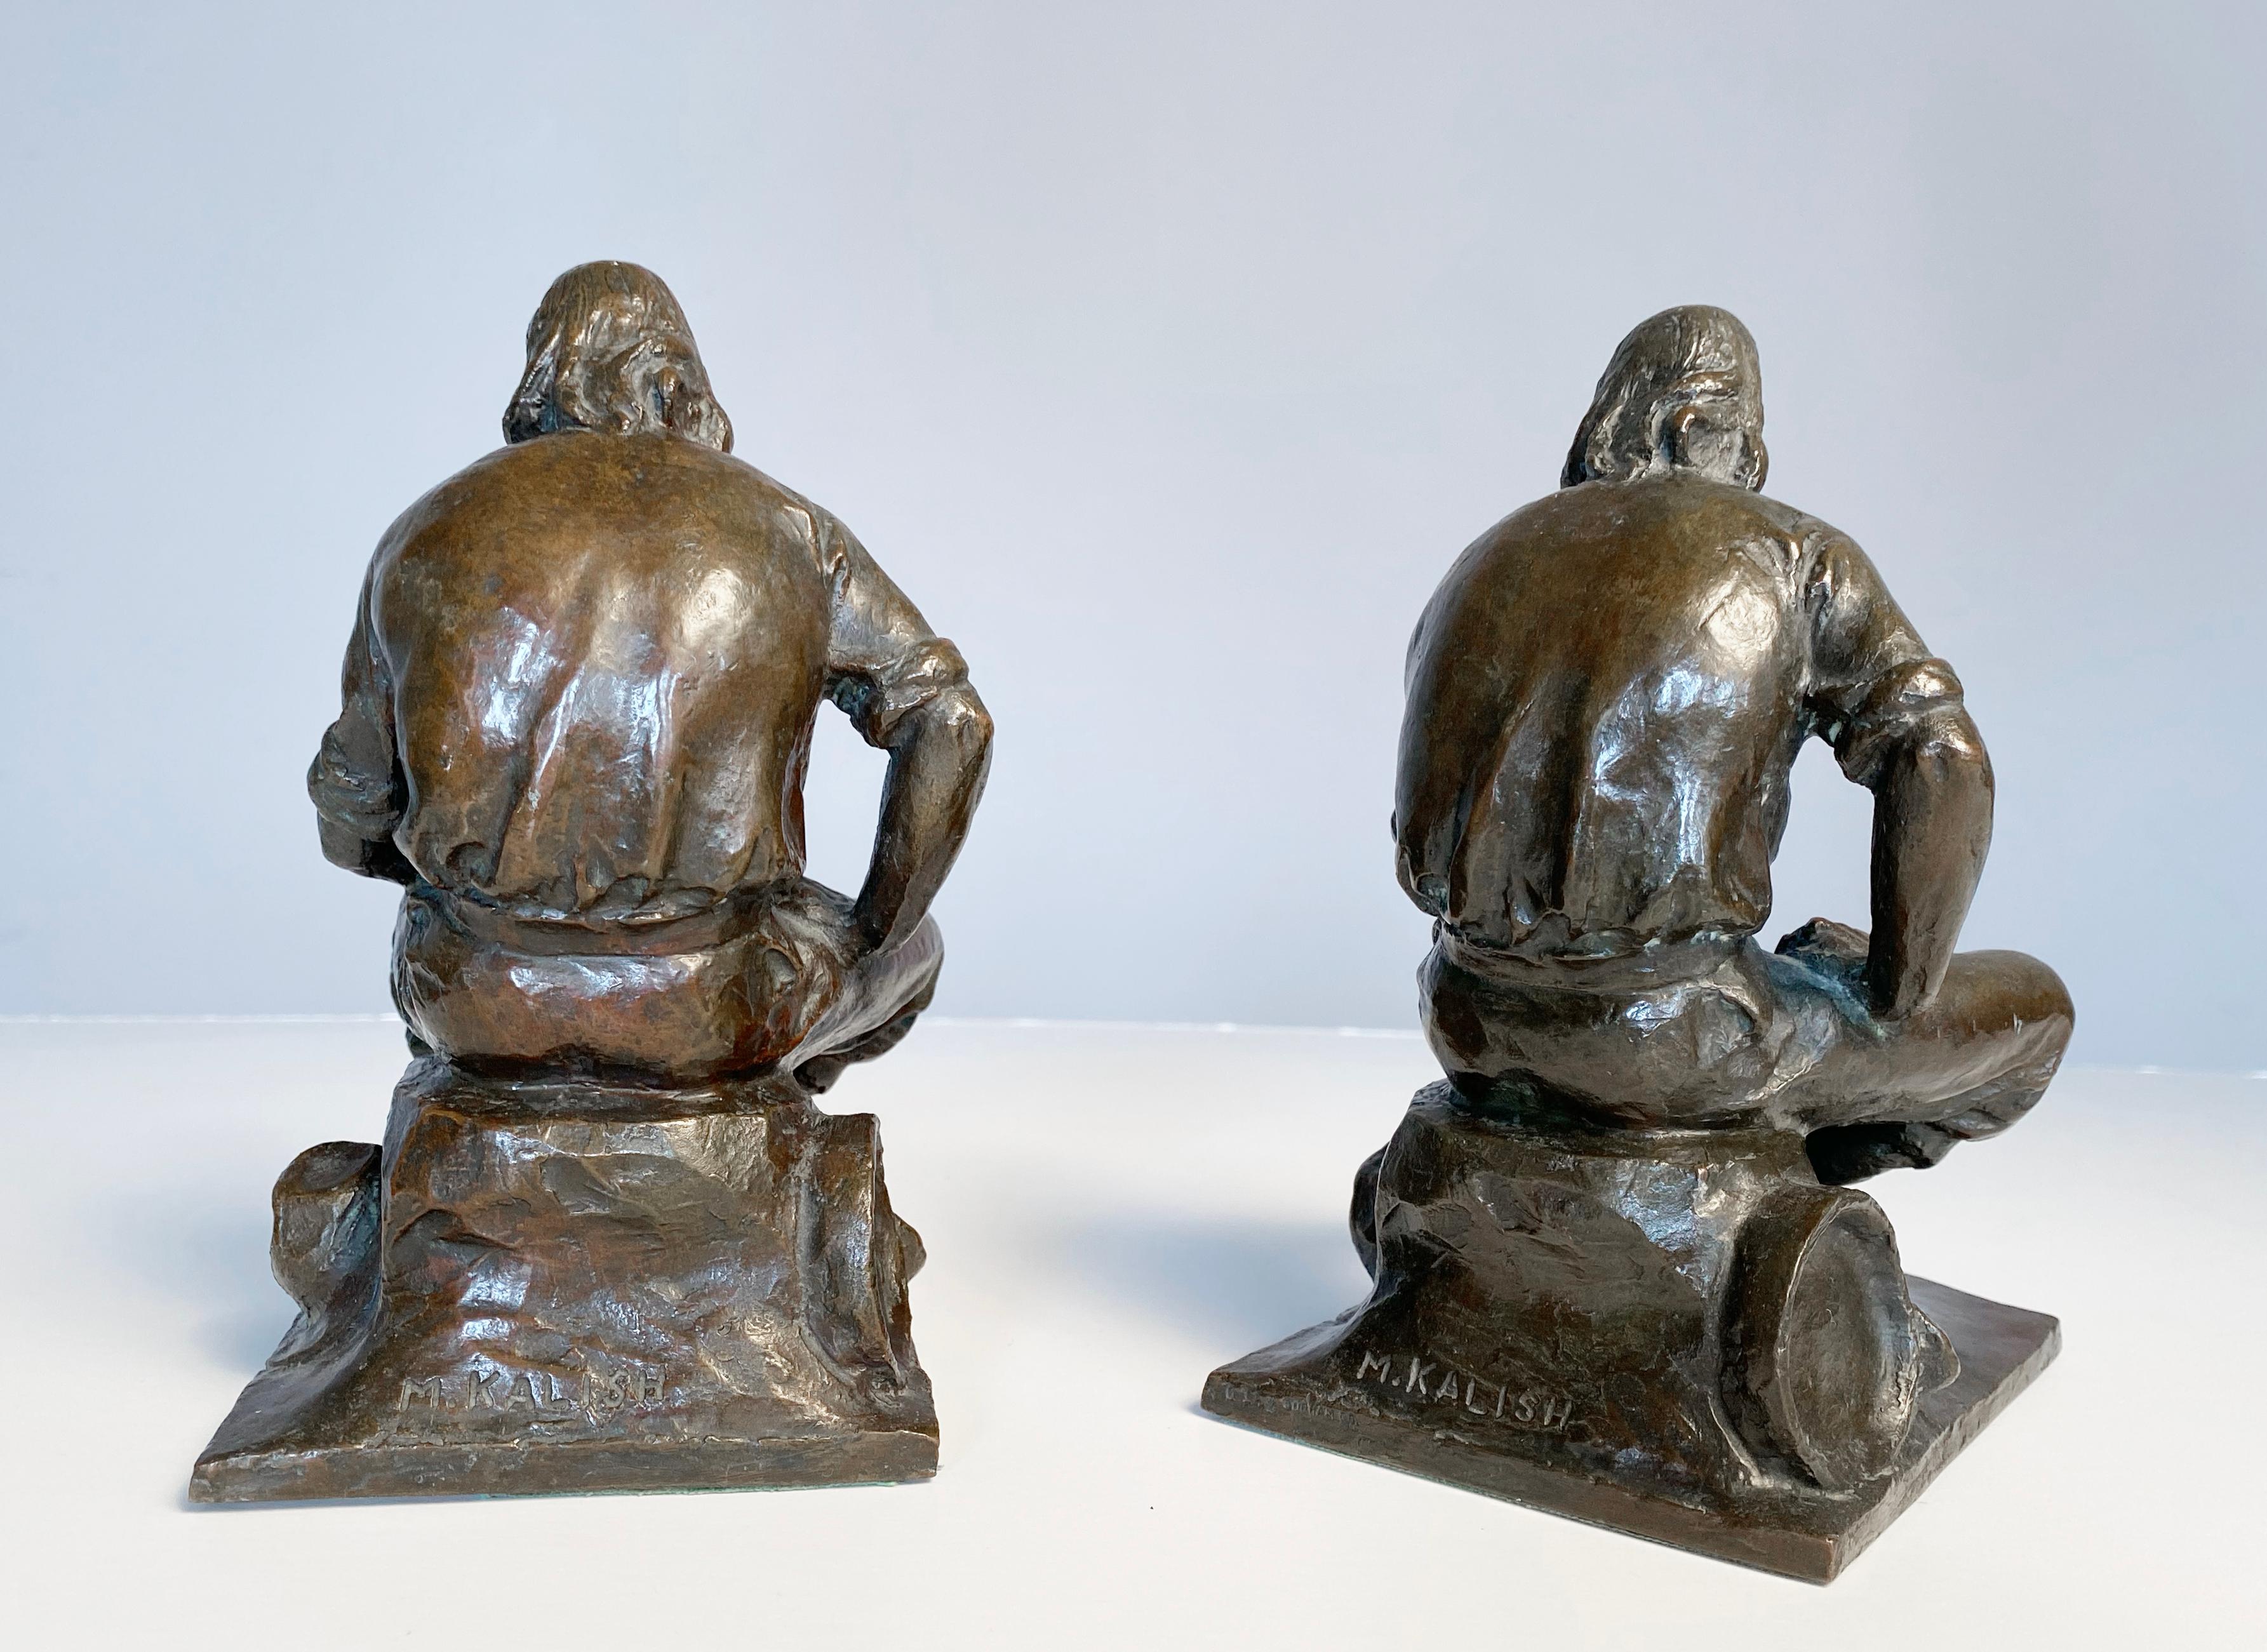 Pair of Miner Bookends - Academic Sculpture by Max Kalish